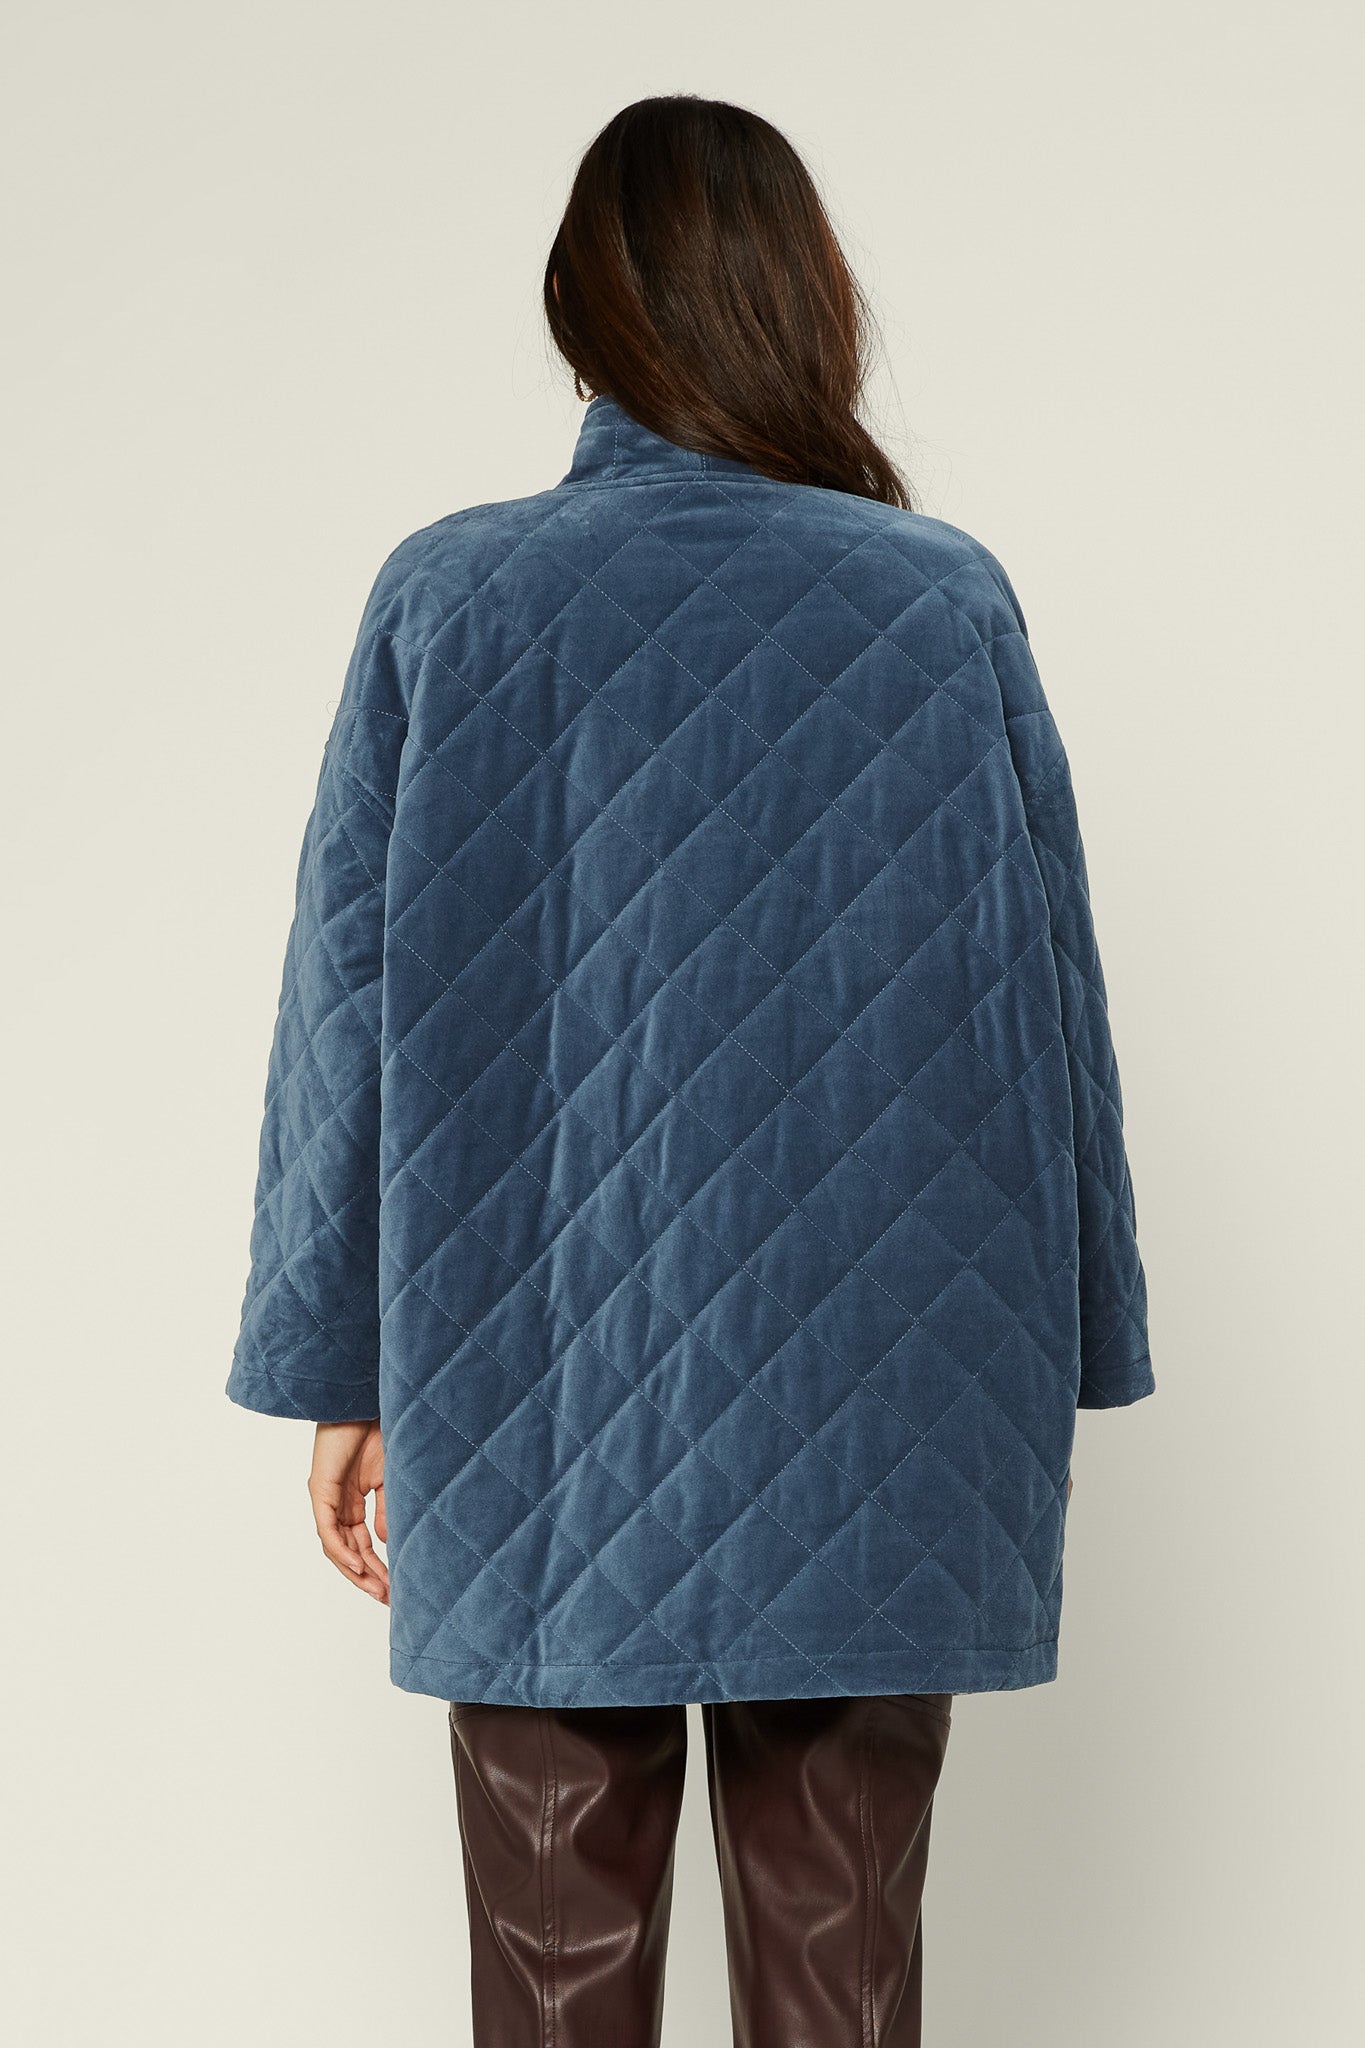 Current Air Women's Reversible Quilted Jacket